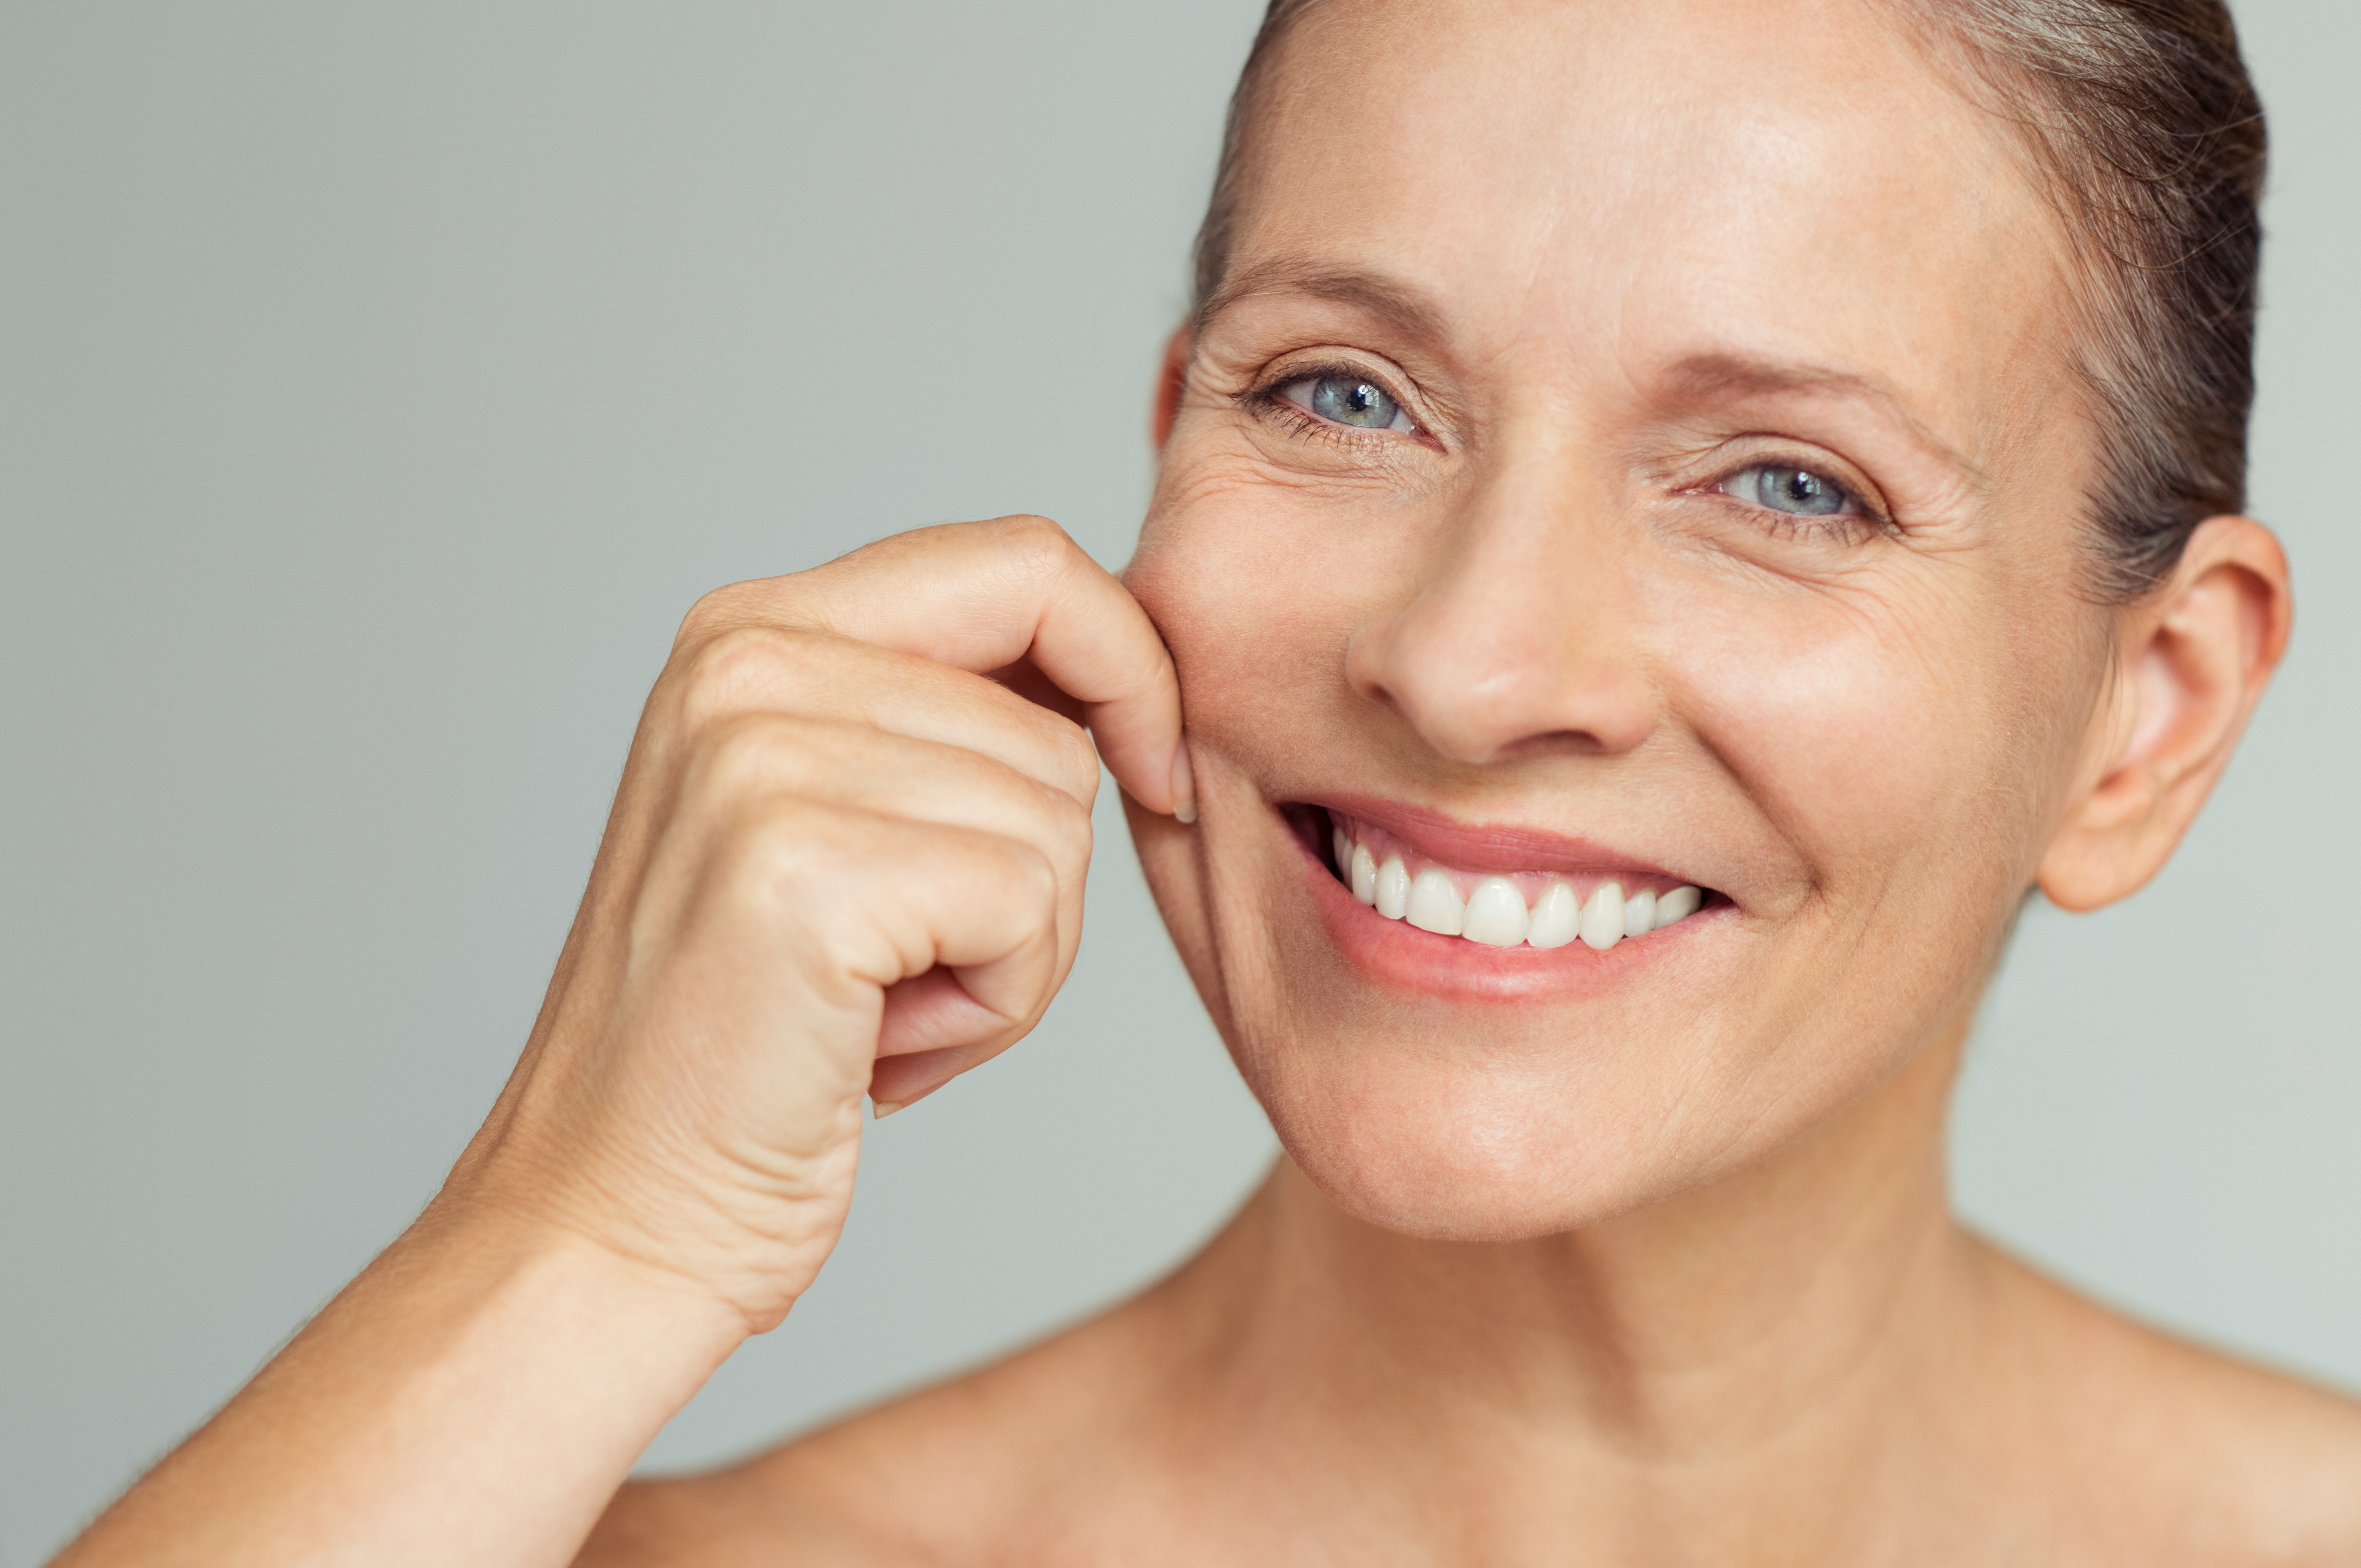 Senior woman pulling cheeks to feel softness and looking at camera. Beauty portrait of happy mature woman smiling with hands on cheek isolated over grey background. Aging process and skin concept.